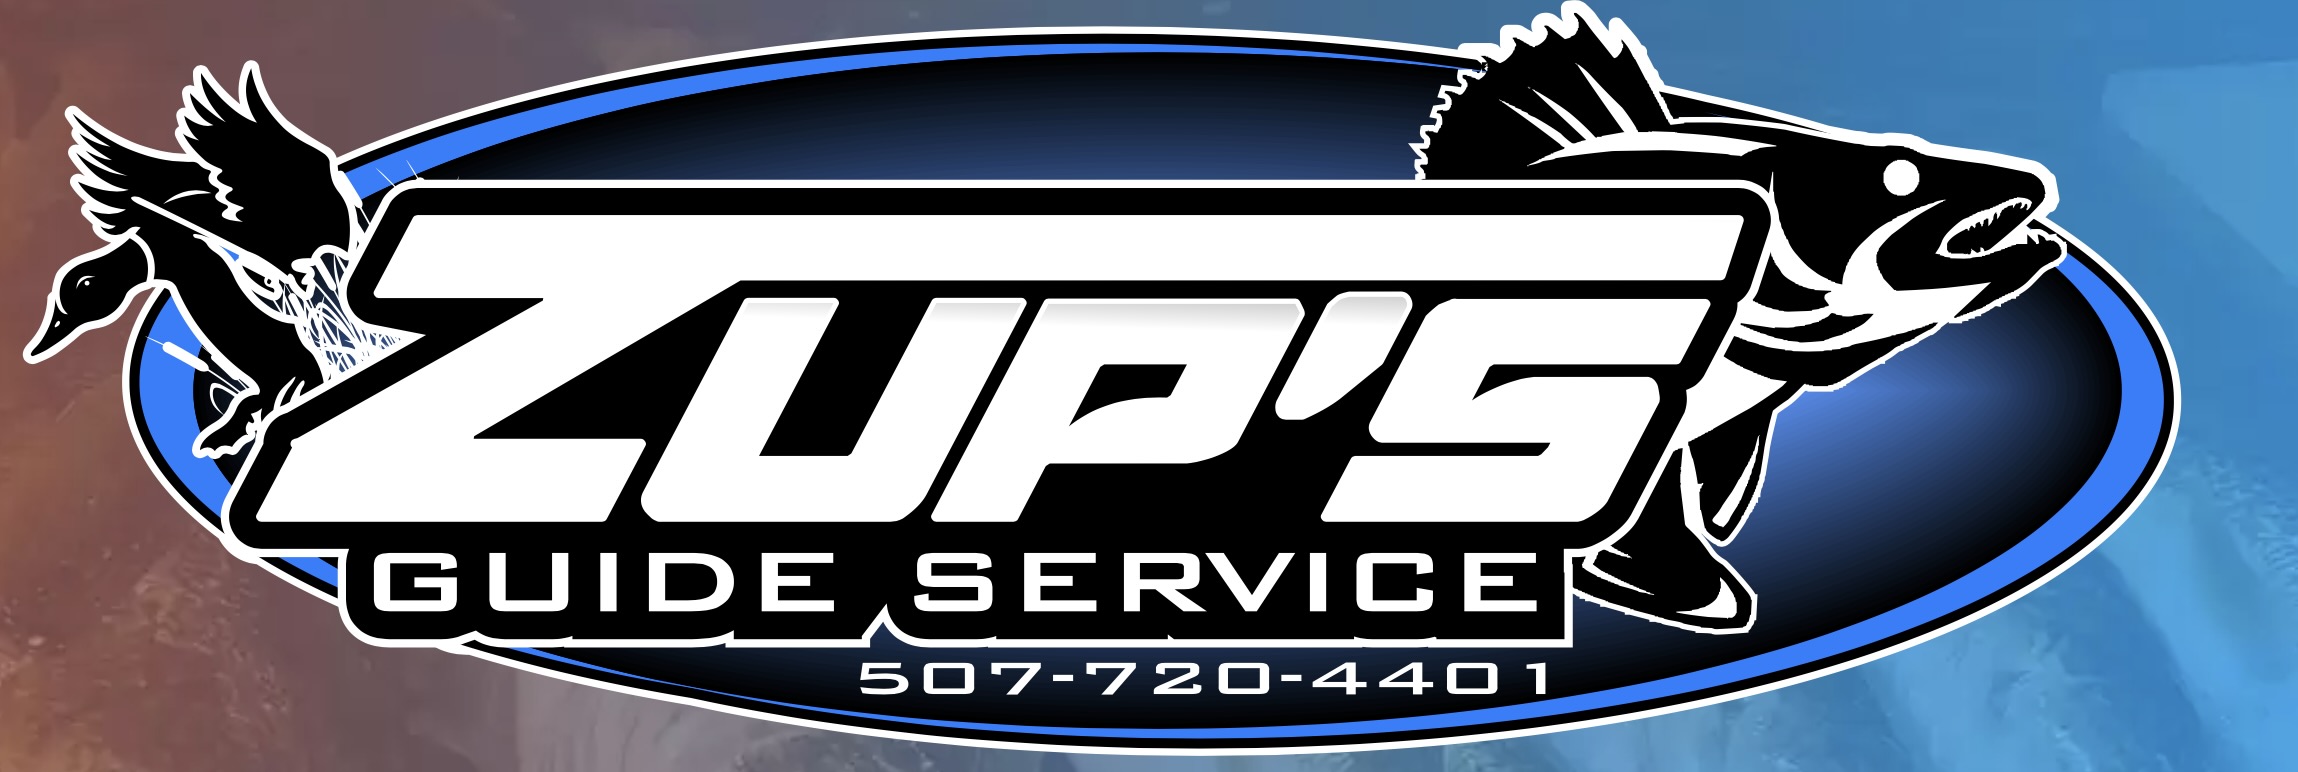 Zups Guide Service